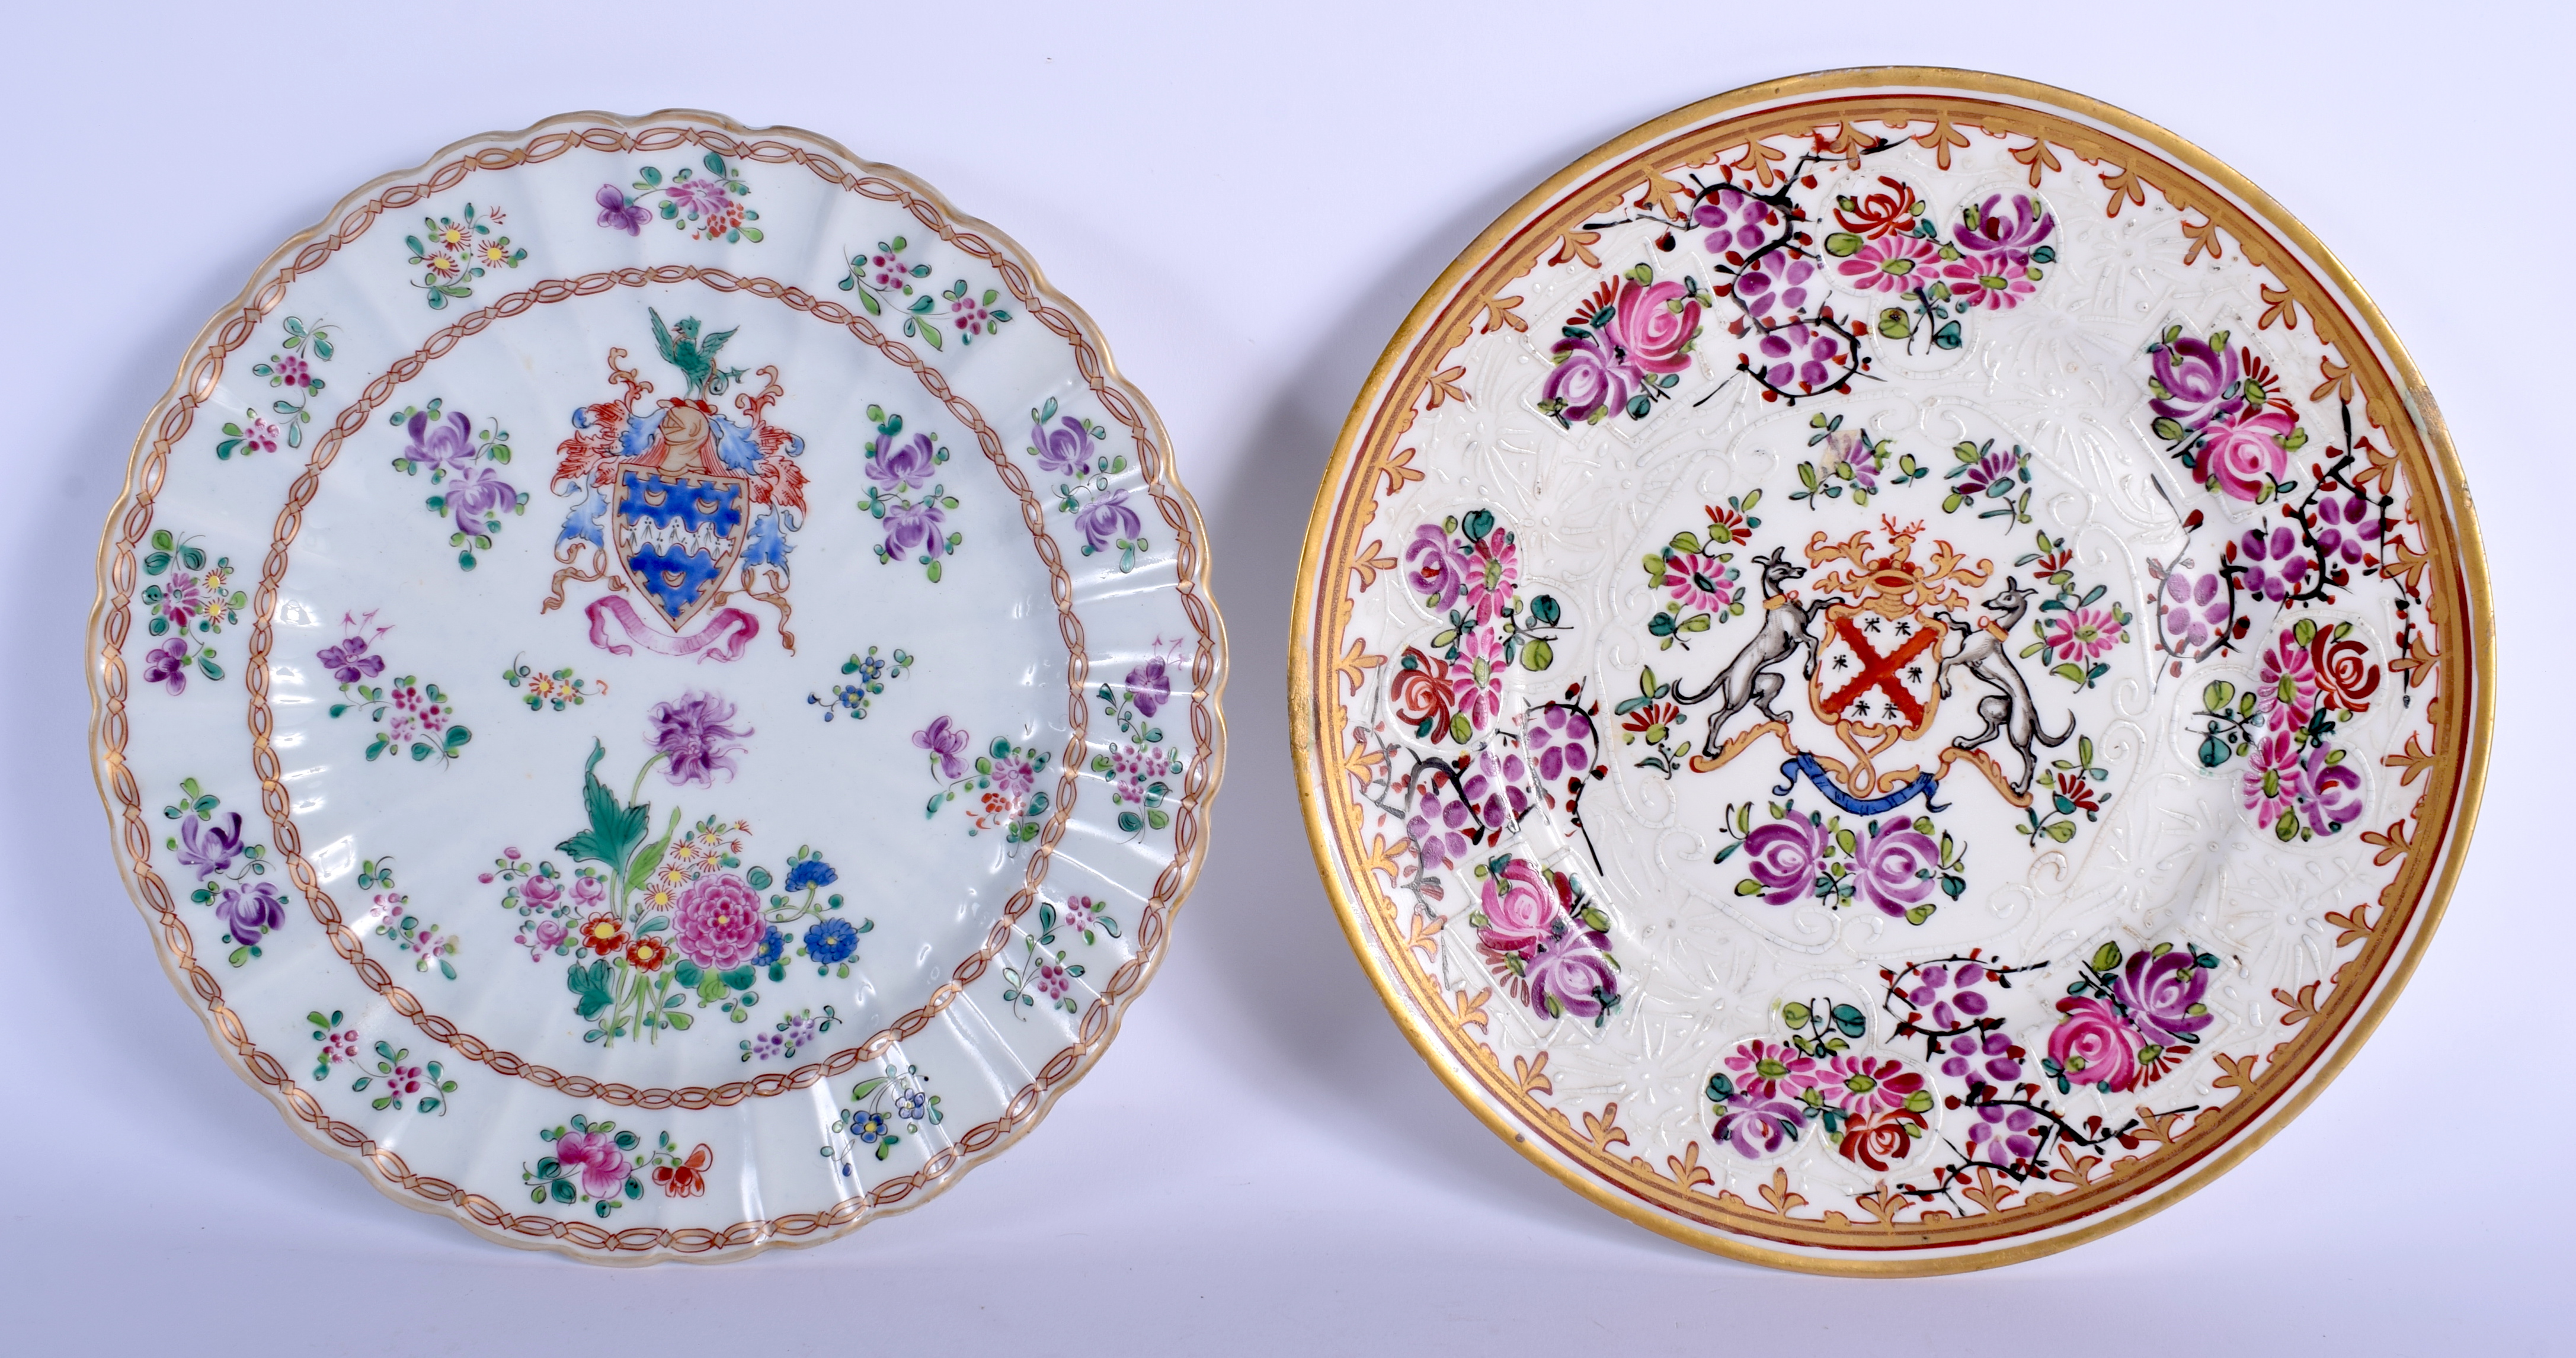 TWO 19TH CENTURY FRENCH SAMSONS OF PARIS PORCELAIN PLATES. 22 cm wide. (2)